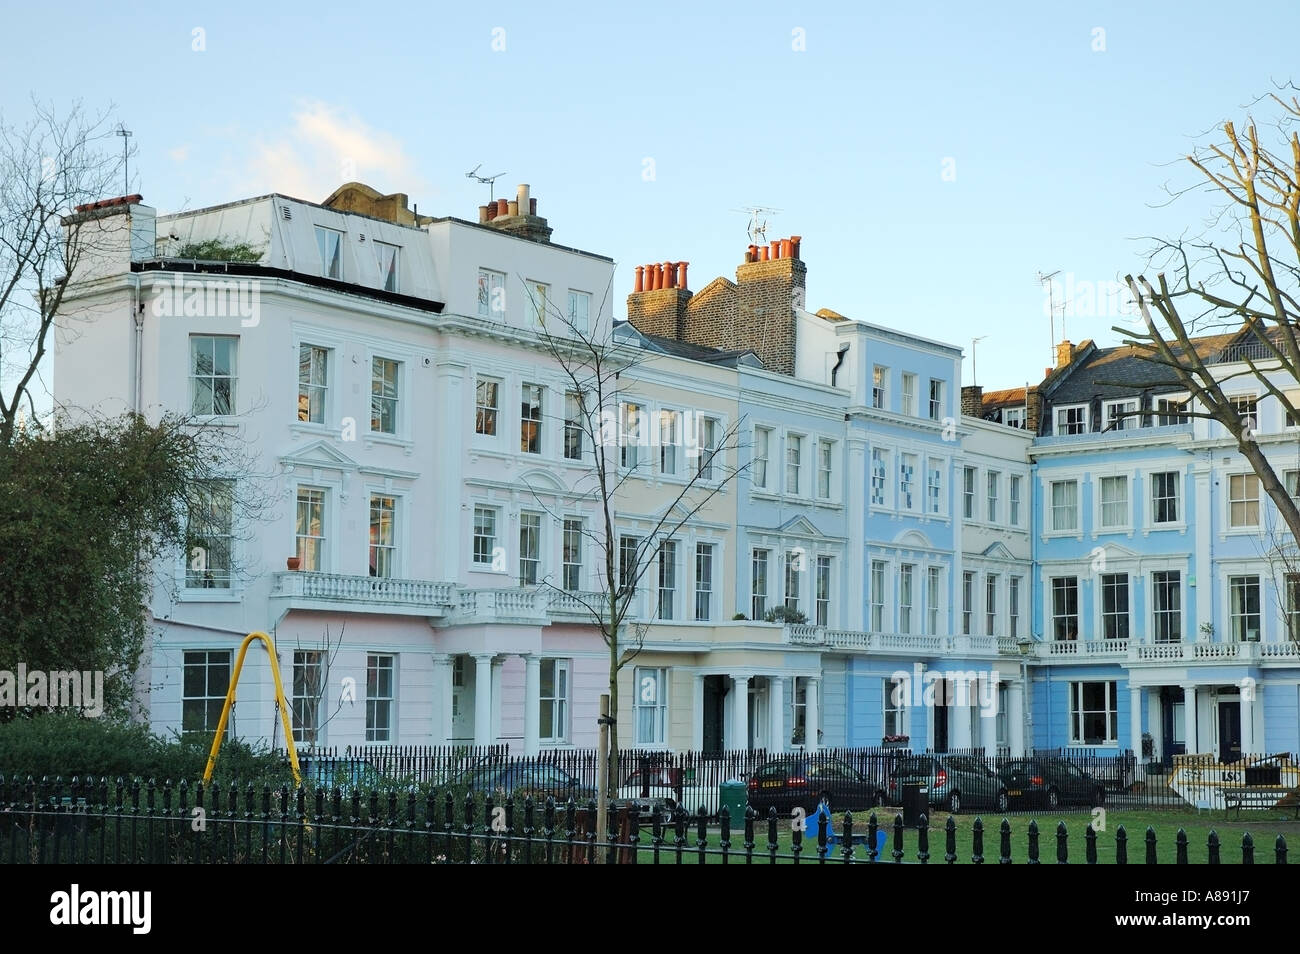 Terrace housing, pastel colour residential architecture properties at Primrose Hill London, Great Britain, UK, GB, England, EU Stock Photo